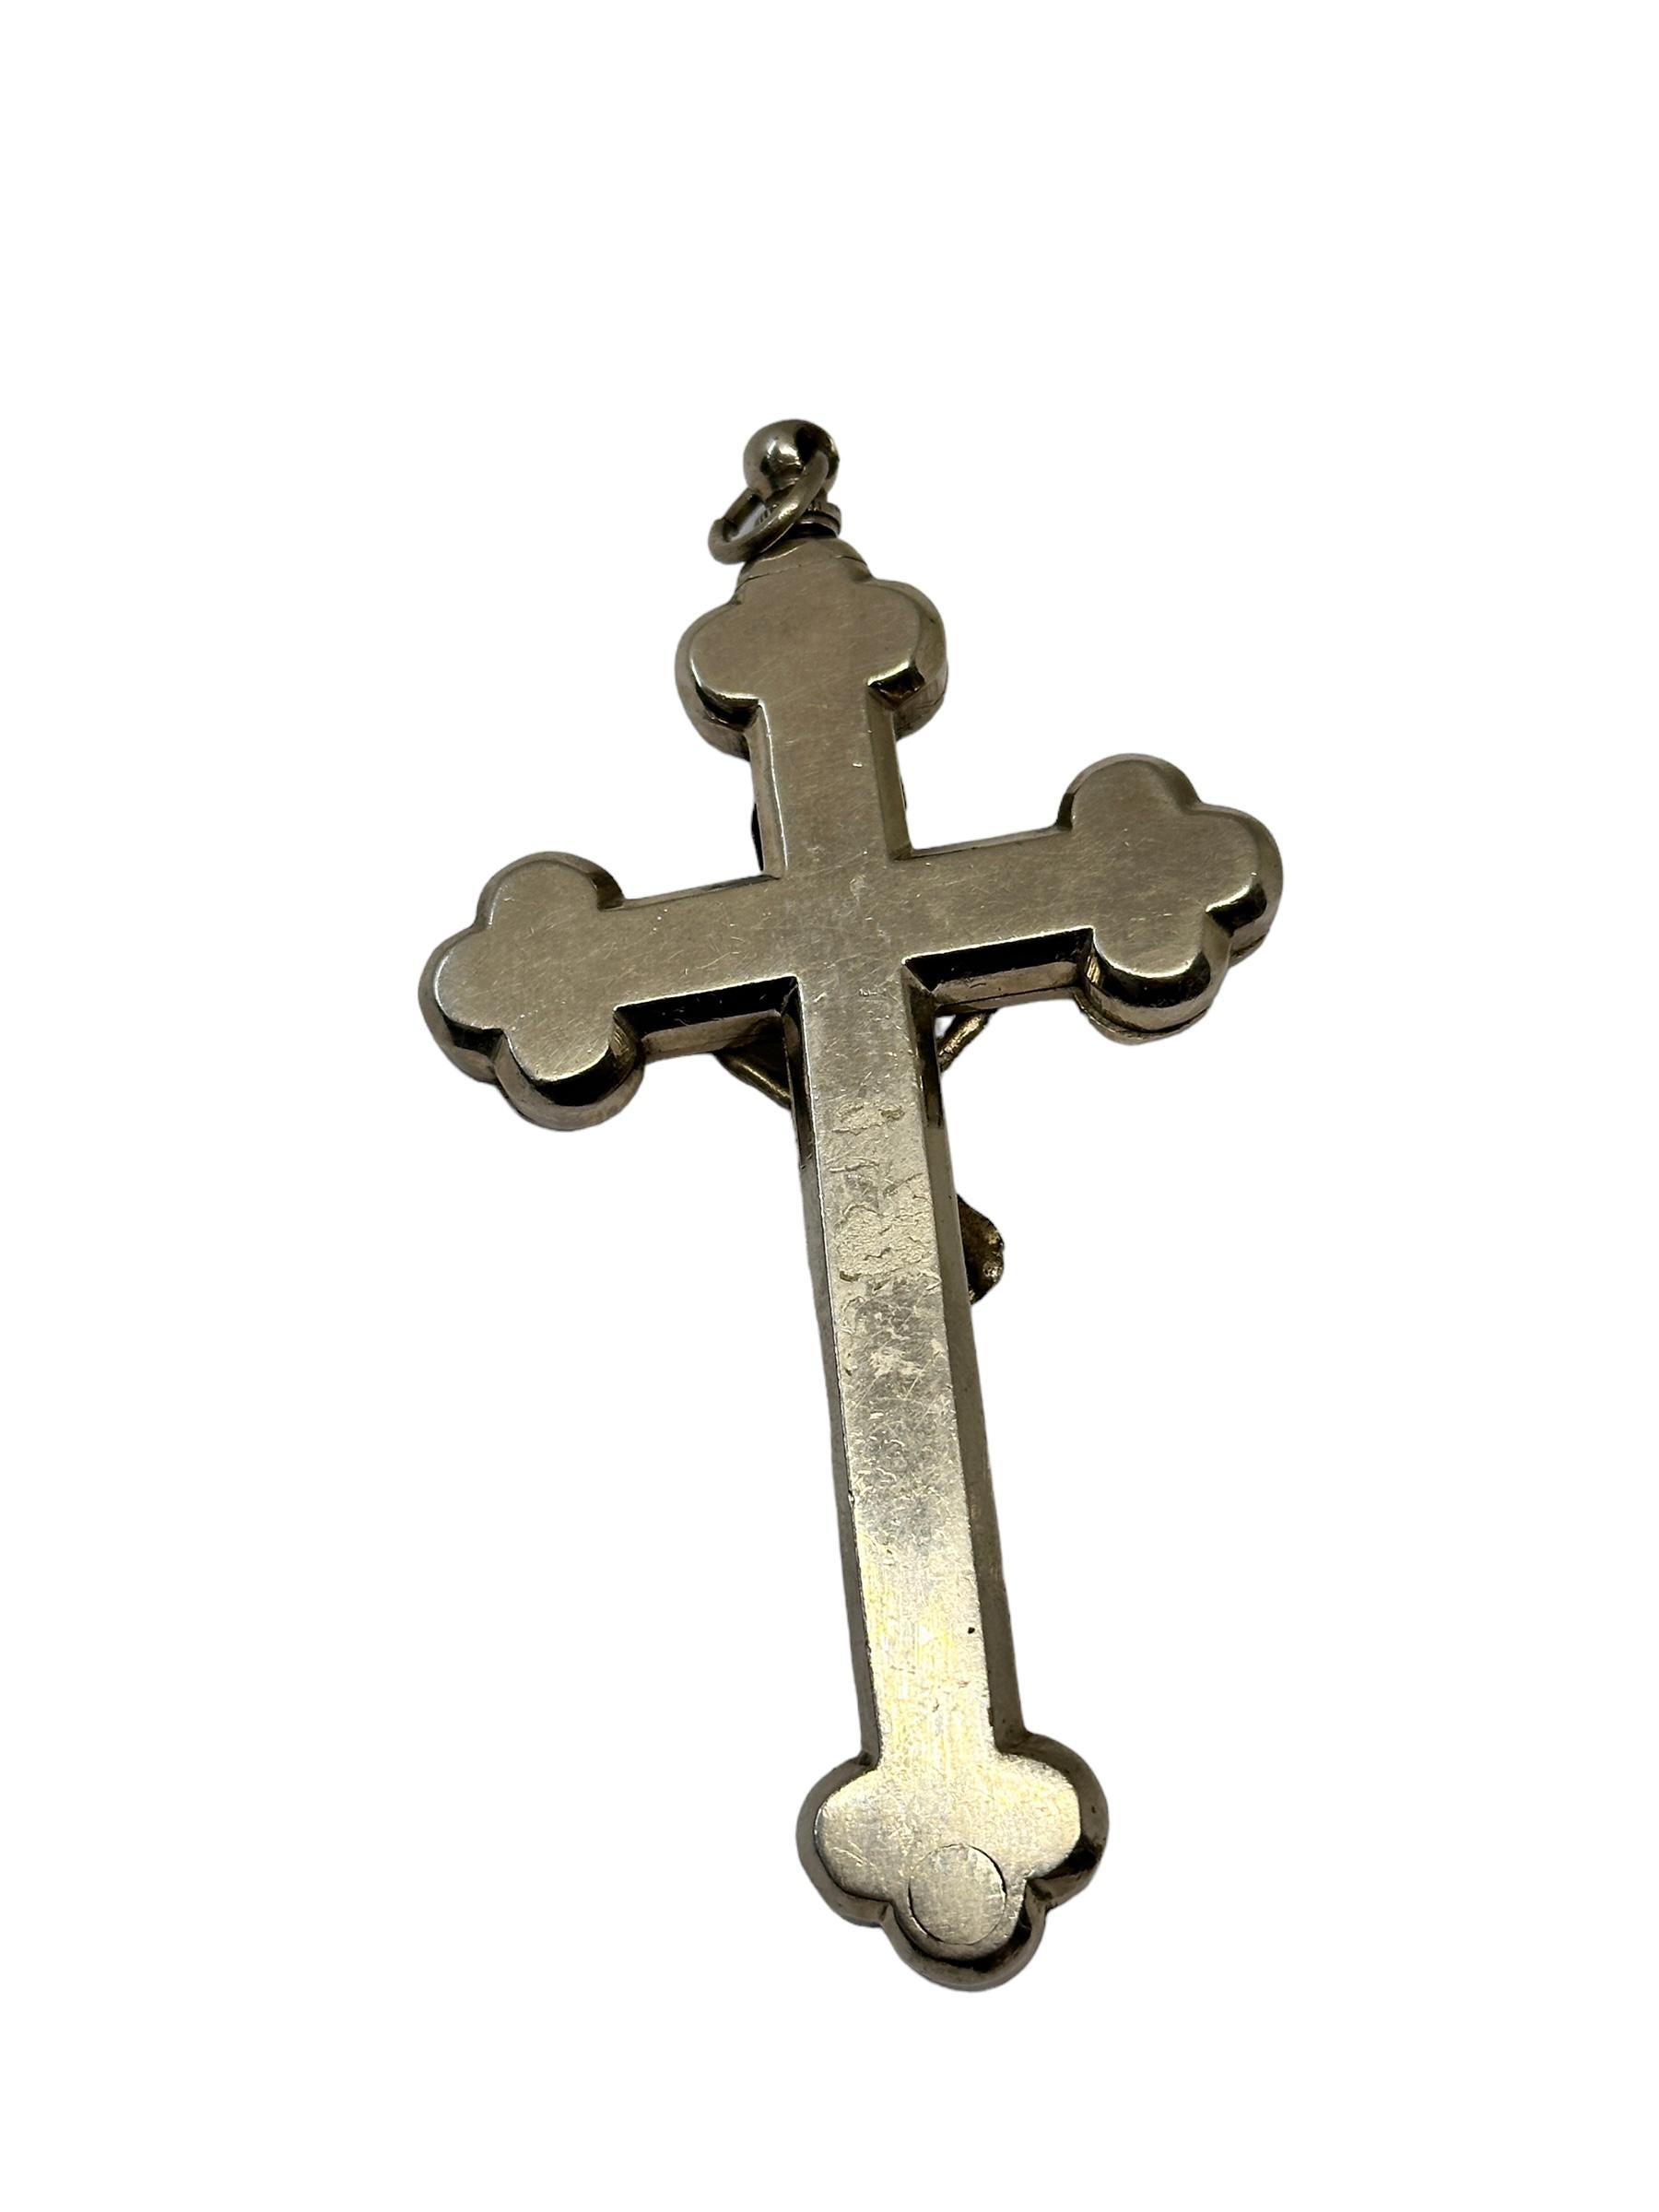 Hand-Crafted Large Antique Catholic Reliquary Box Crucifix Pendant with Six Relics of Saints For Sale